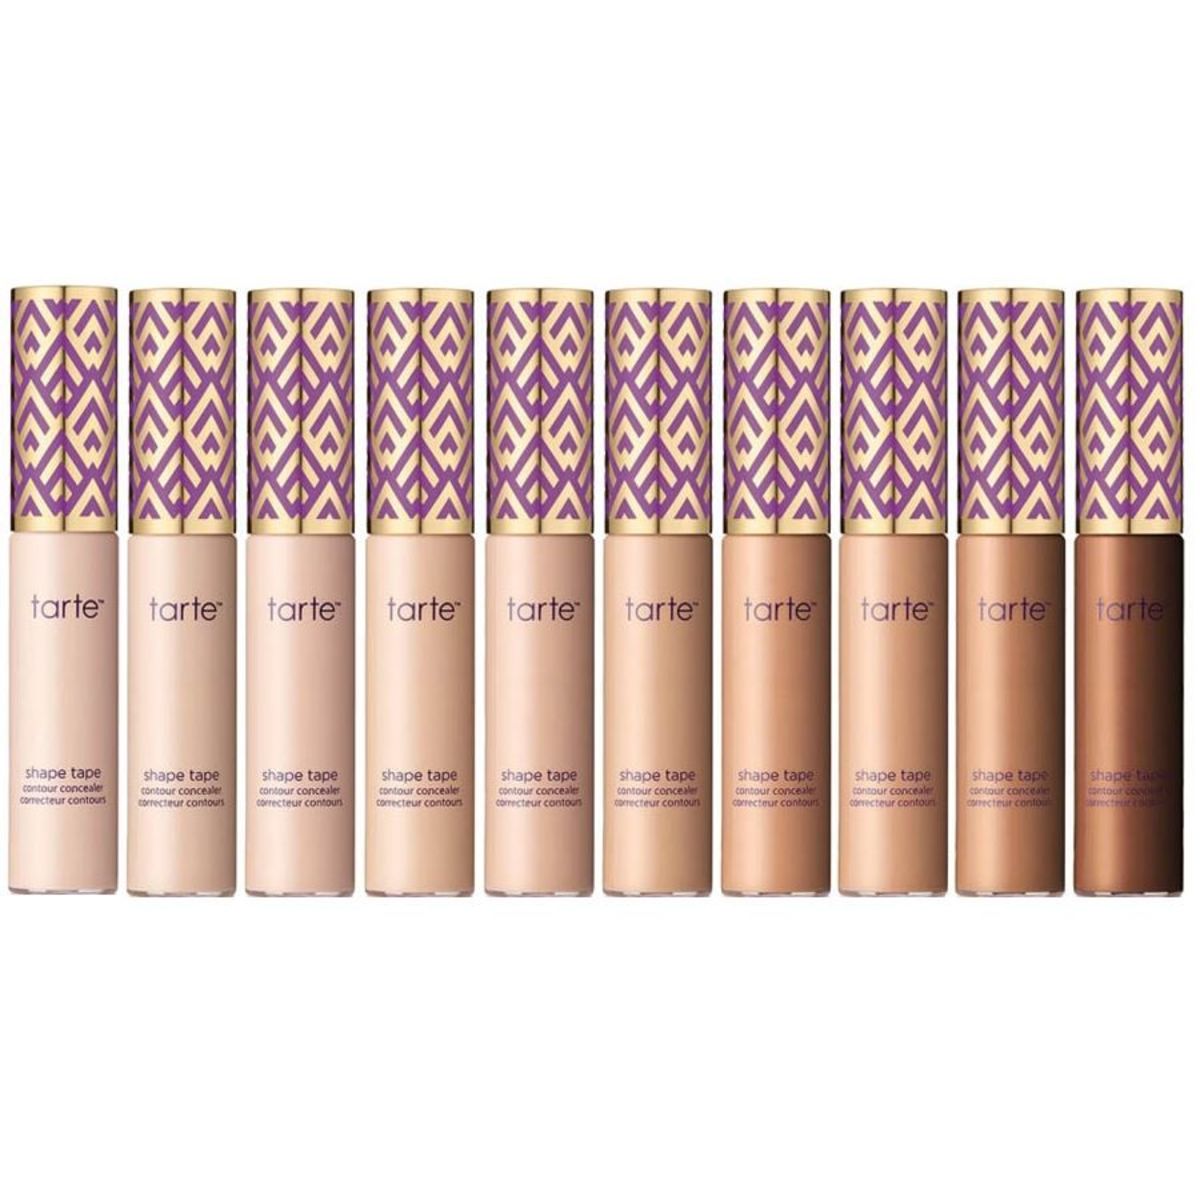 Tarte Double Duty Shape Tape Contour Concealer, $27, available here. Photo: Courtesy of Tarte